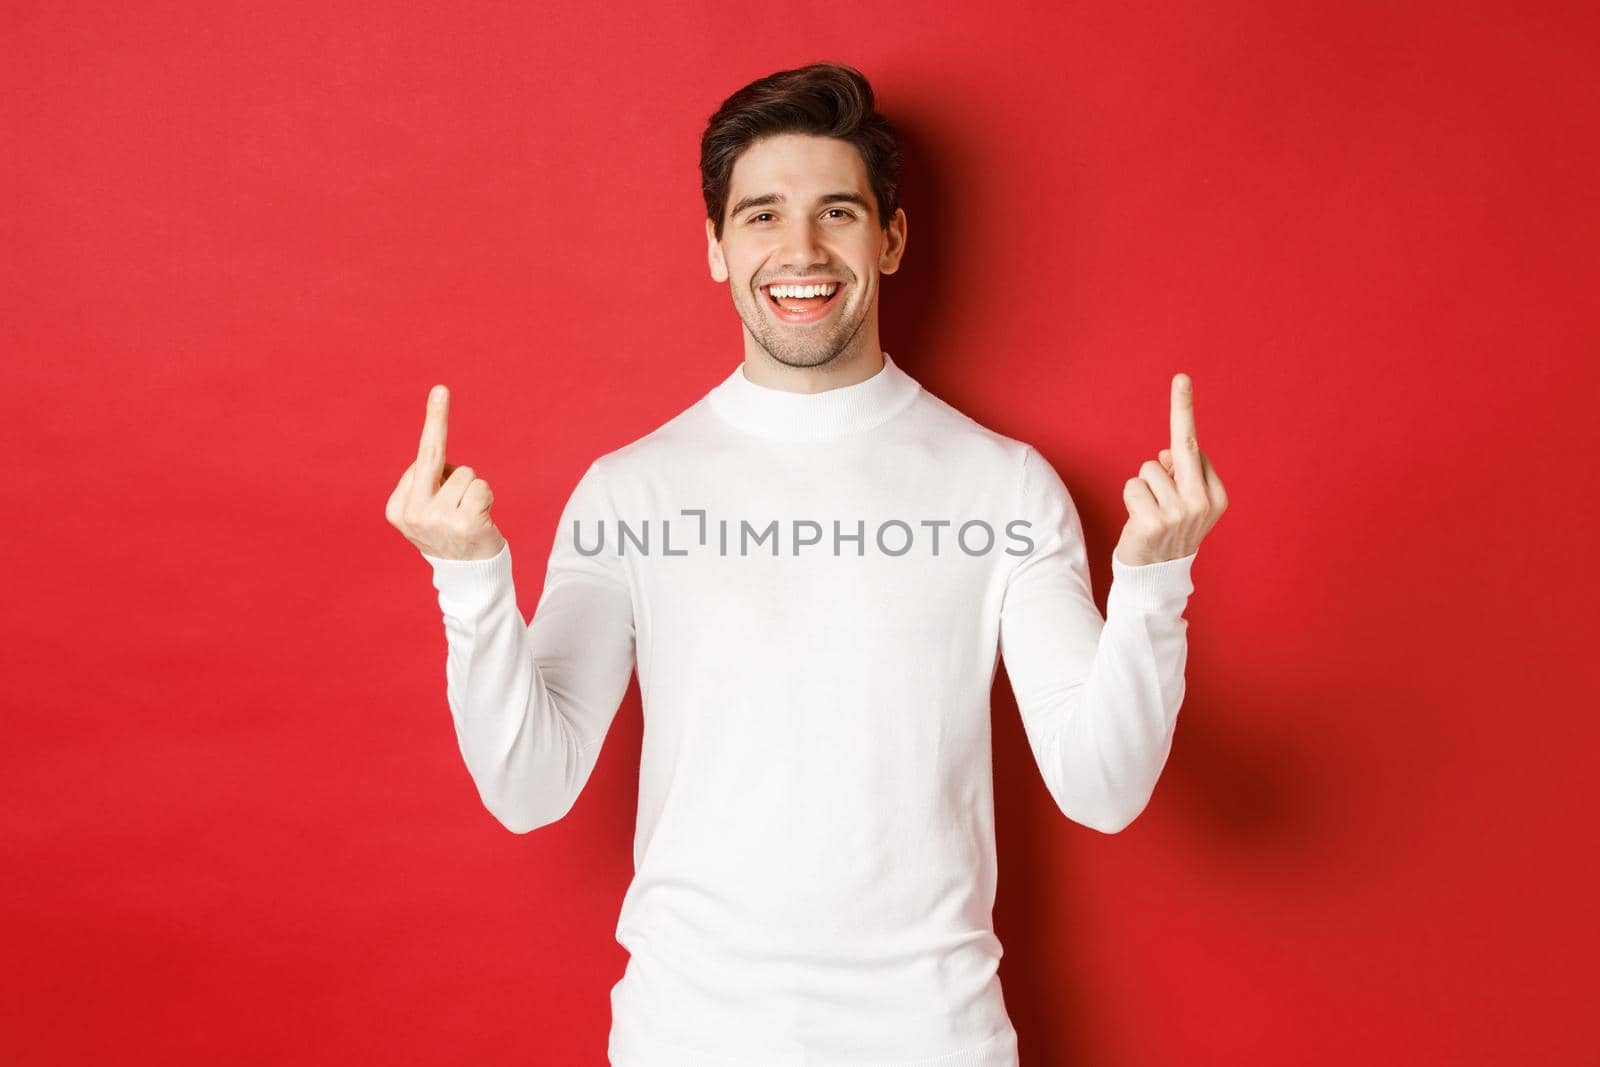 Image of rude and unbothered man laughing while showing middle-fingers, telling to fuck-off, standing over red background.